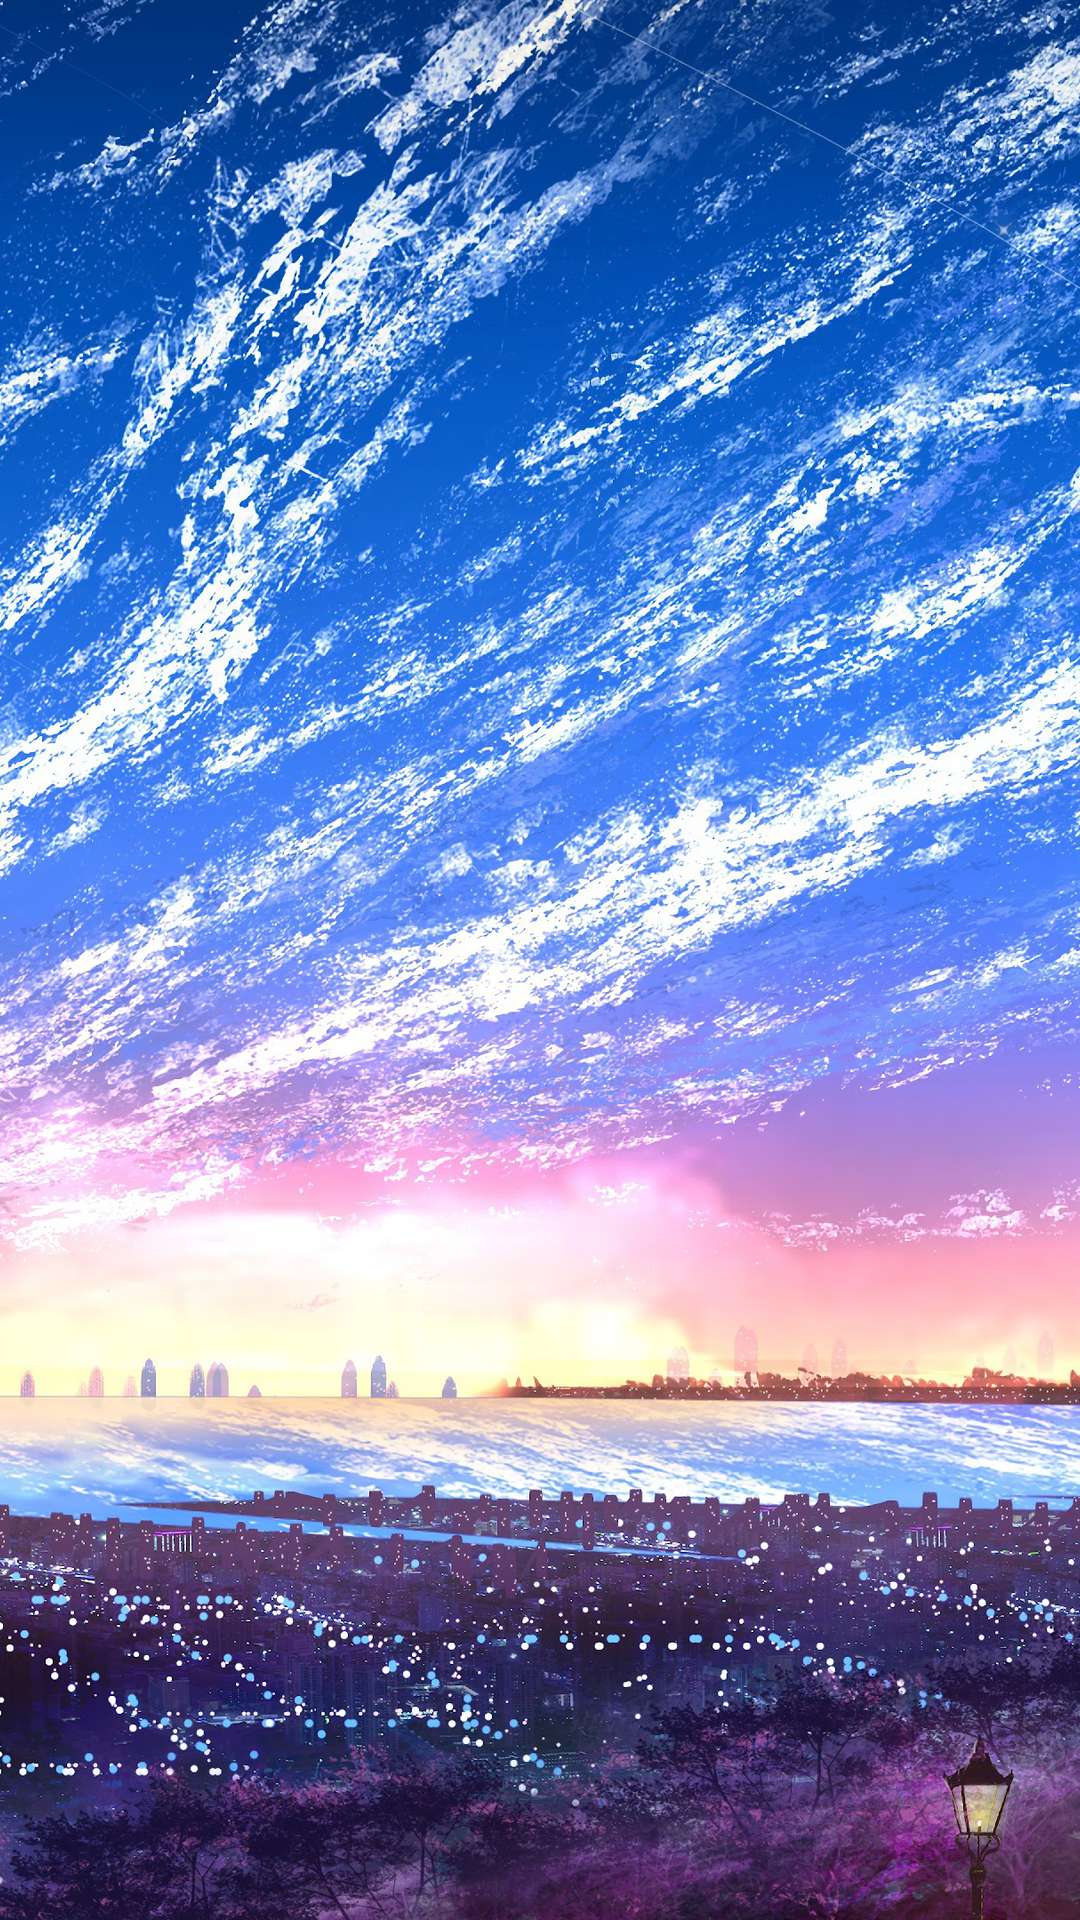 Anime Scenery Wallpapers